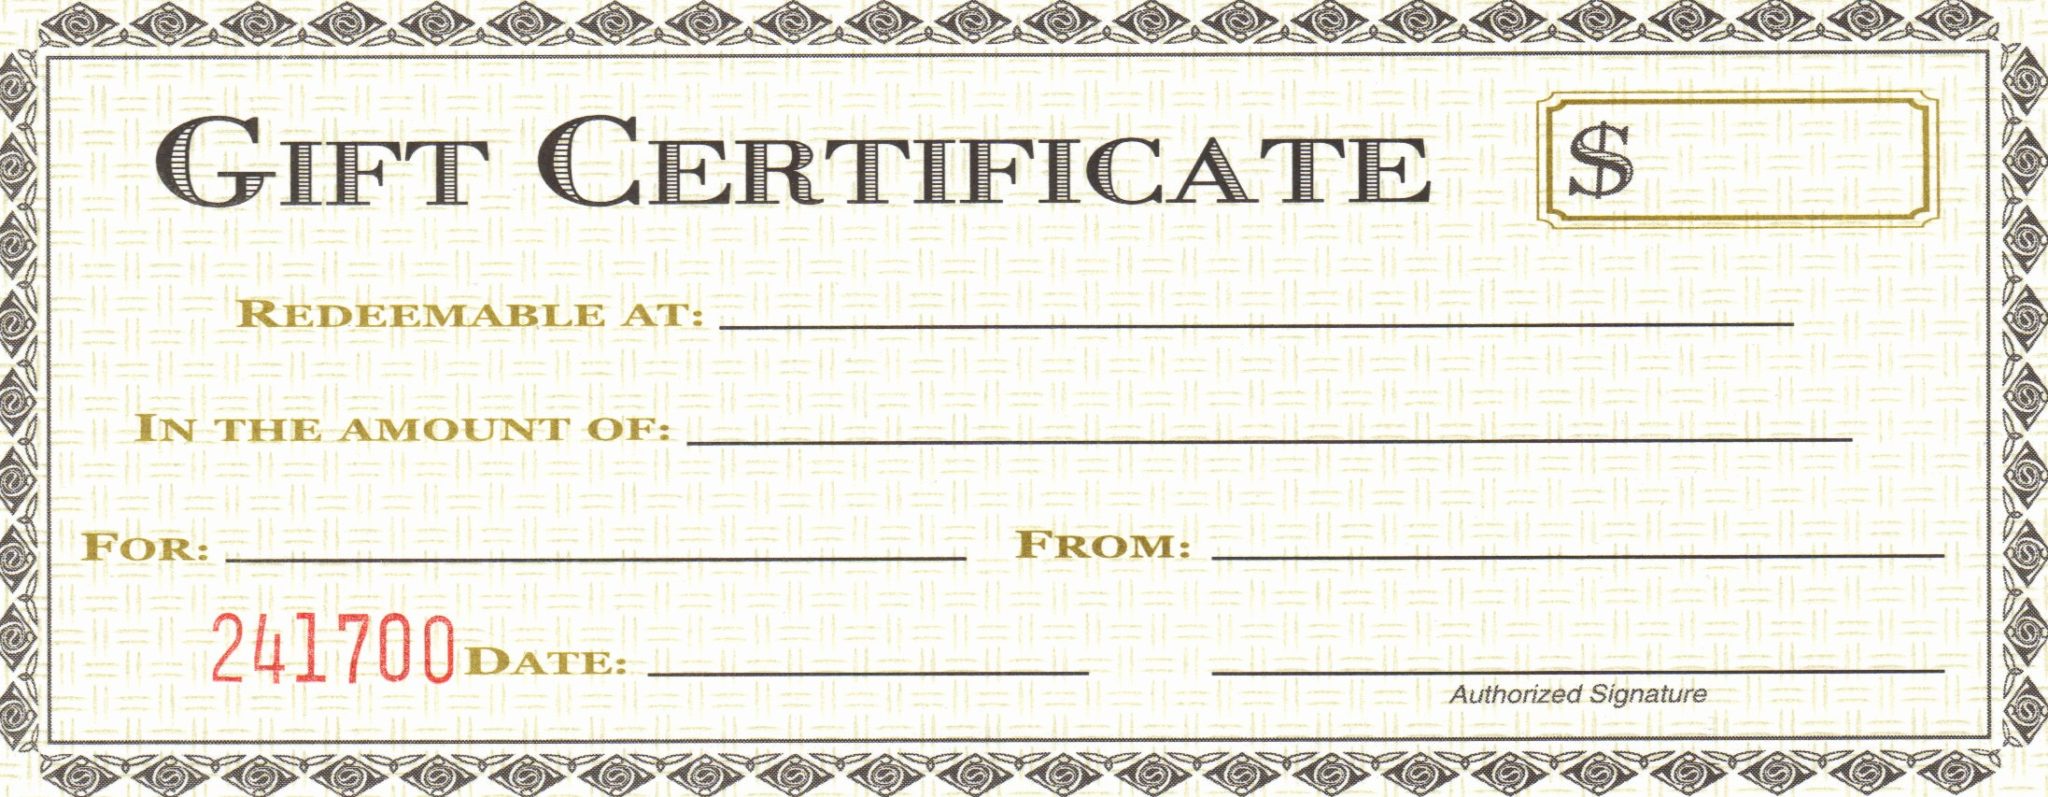 hole in one certificate template